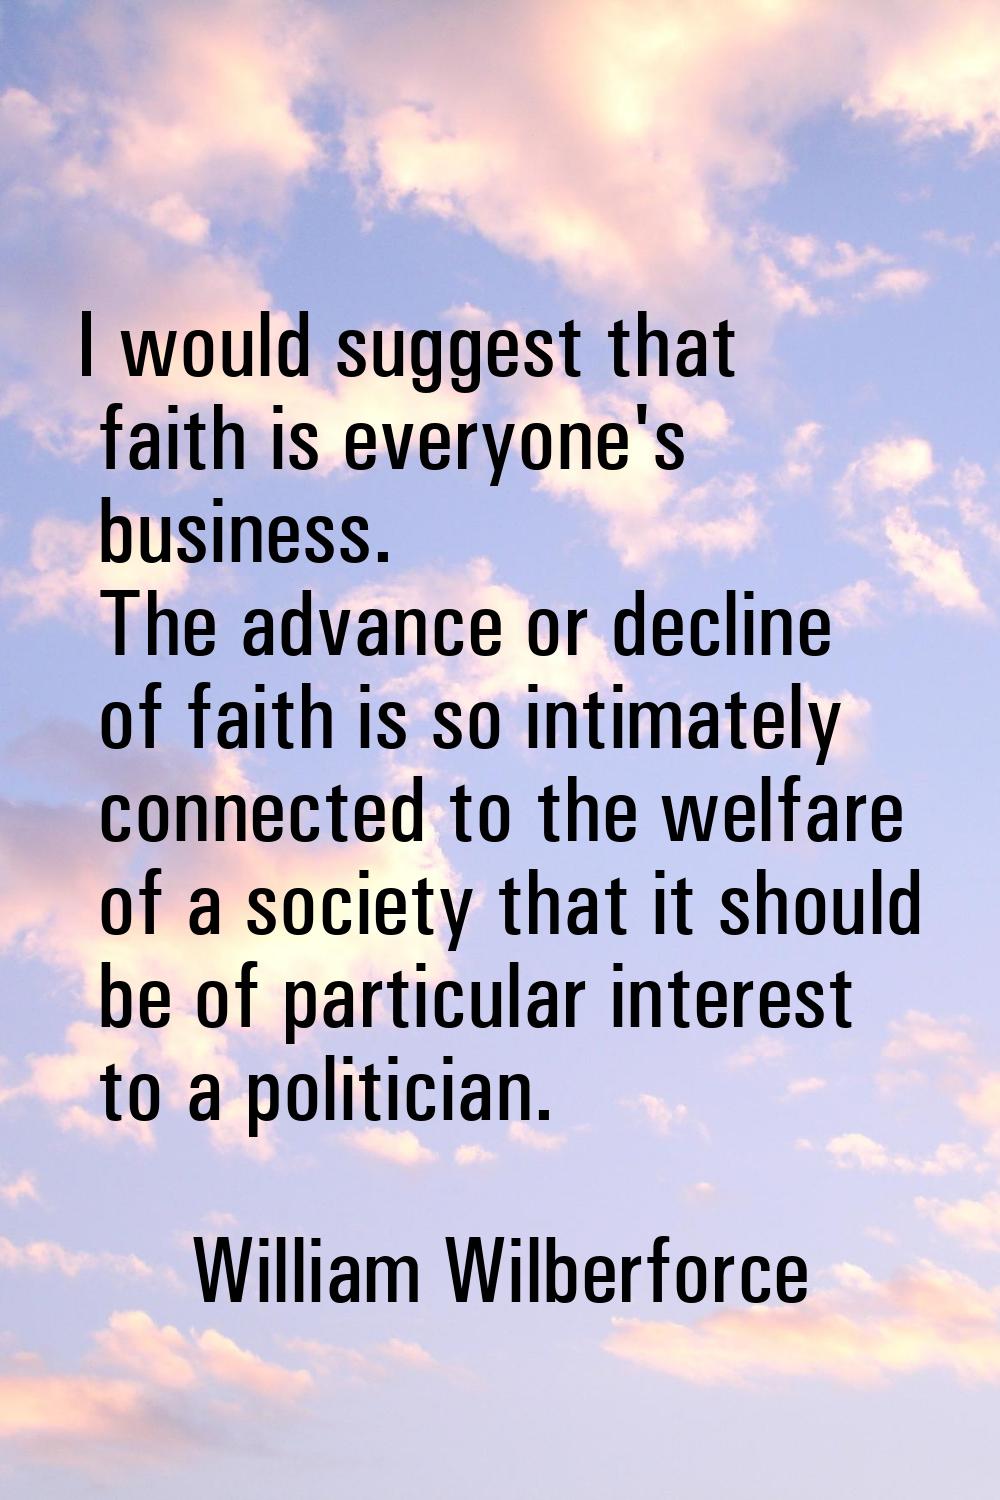 I would suggest that faith is everyone's business. The advance or decline of faith is so intimately